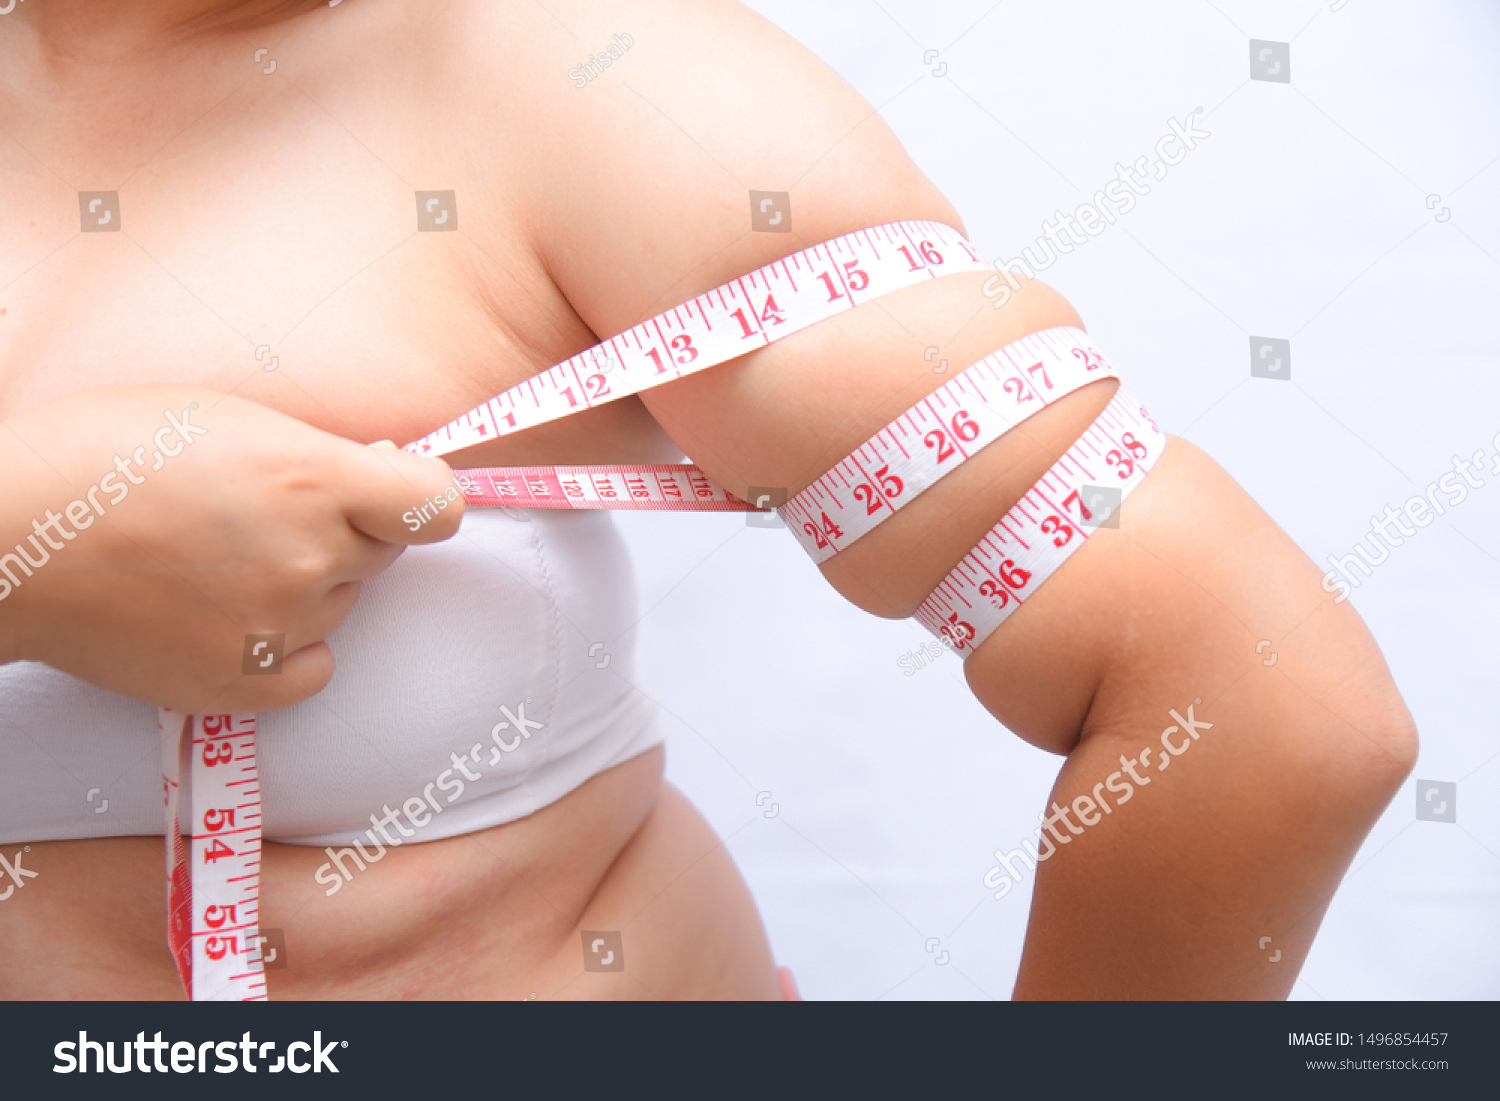 Beautiful fat woman She uses a tape measure to measure her arms on a white background. She wants to lose weight the concept of surgery and break down the fat underneath. #1496854457